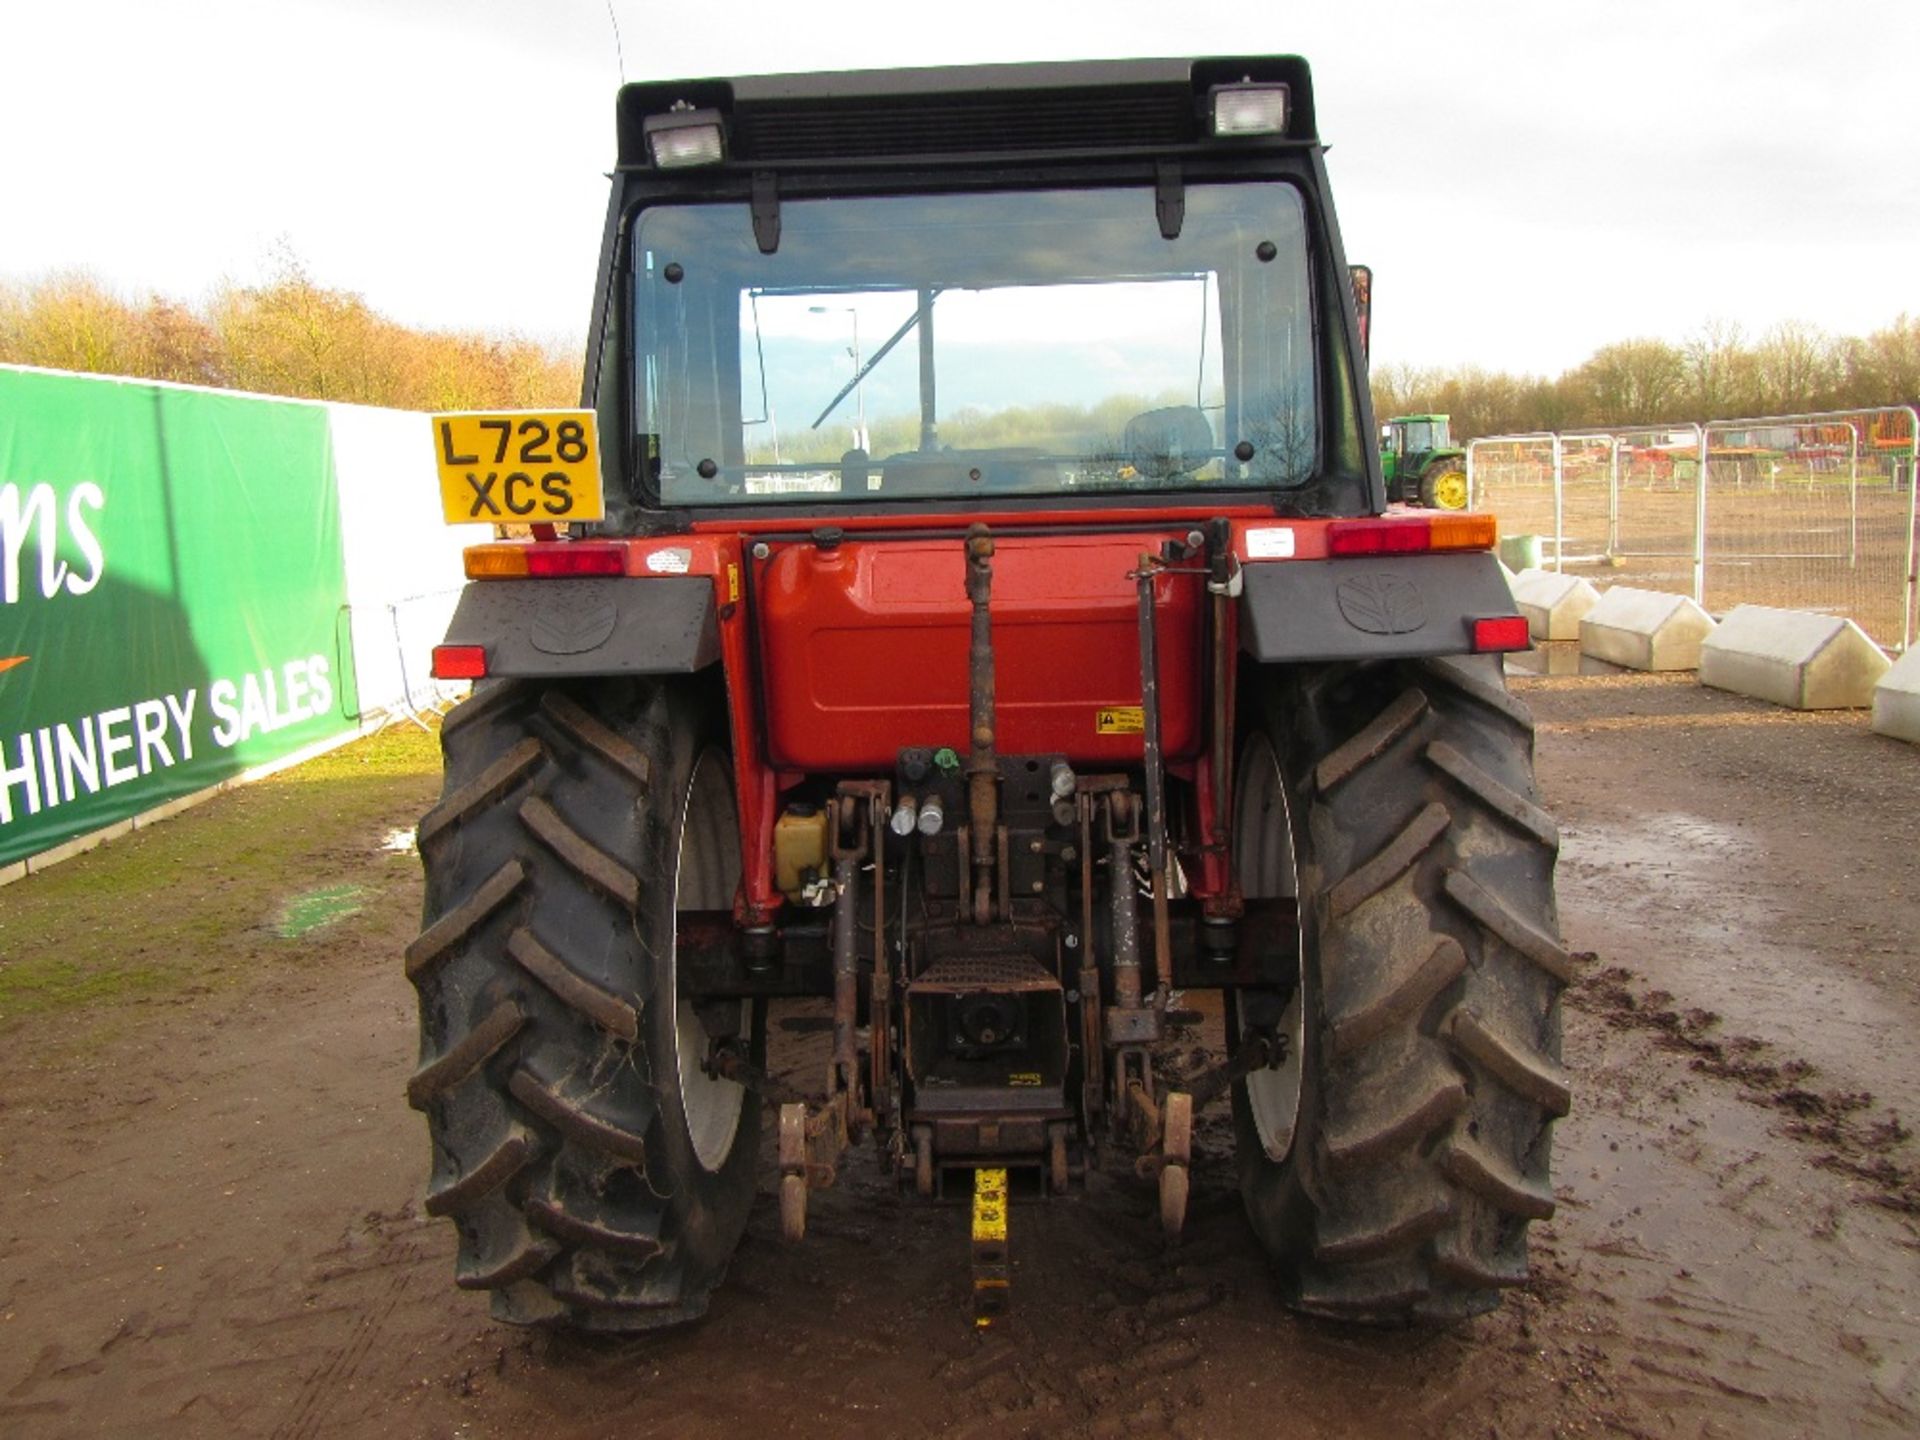 Fiat 82-94 4wd Tractor. One Owner. Reg Docs will be supplied 2675 Hrs. Reg. No. L728 XCS Ser No - Image 6 of 18